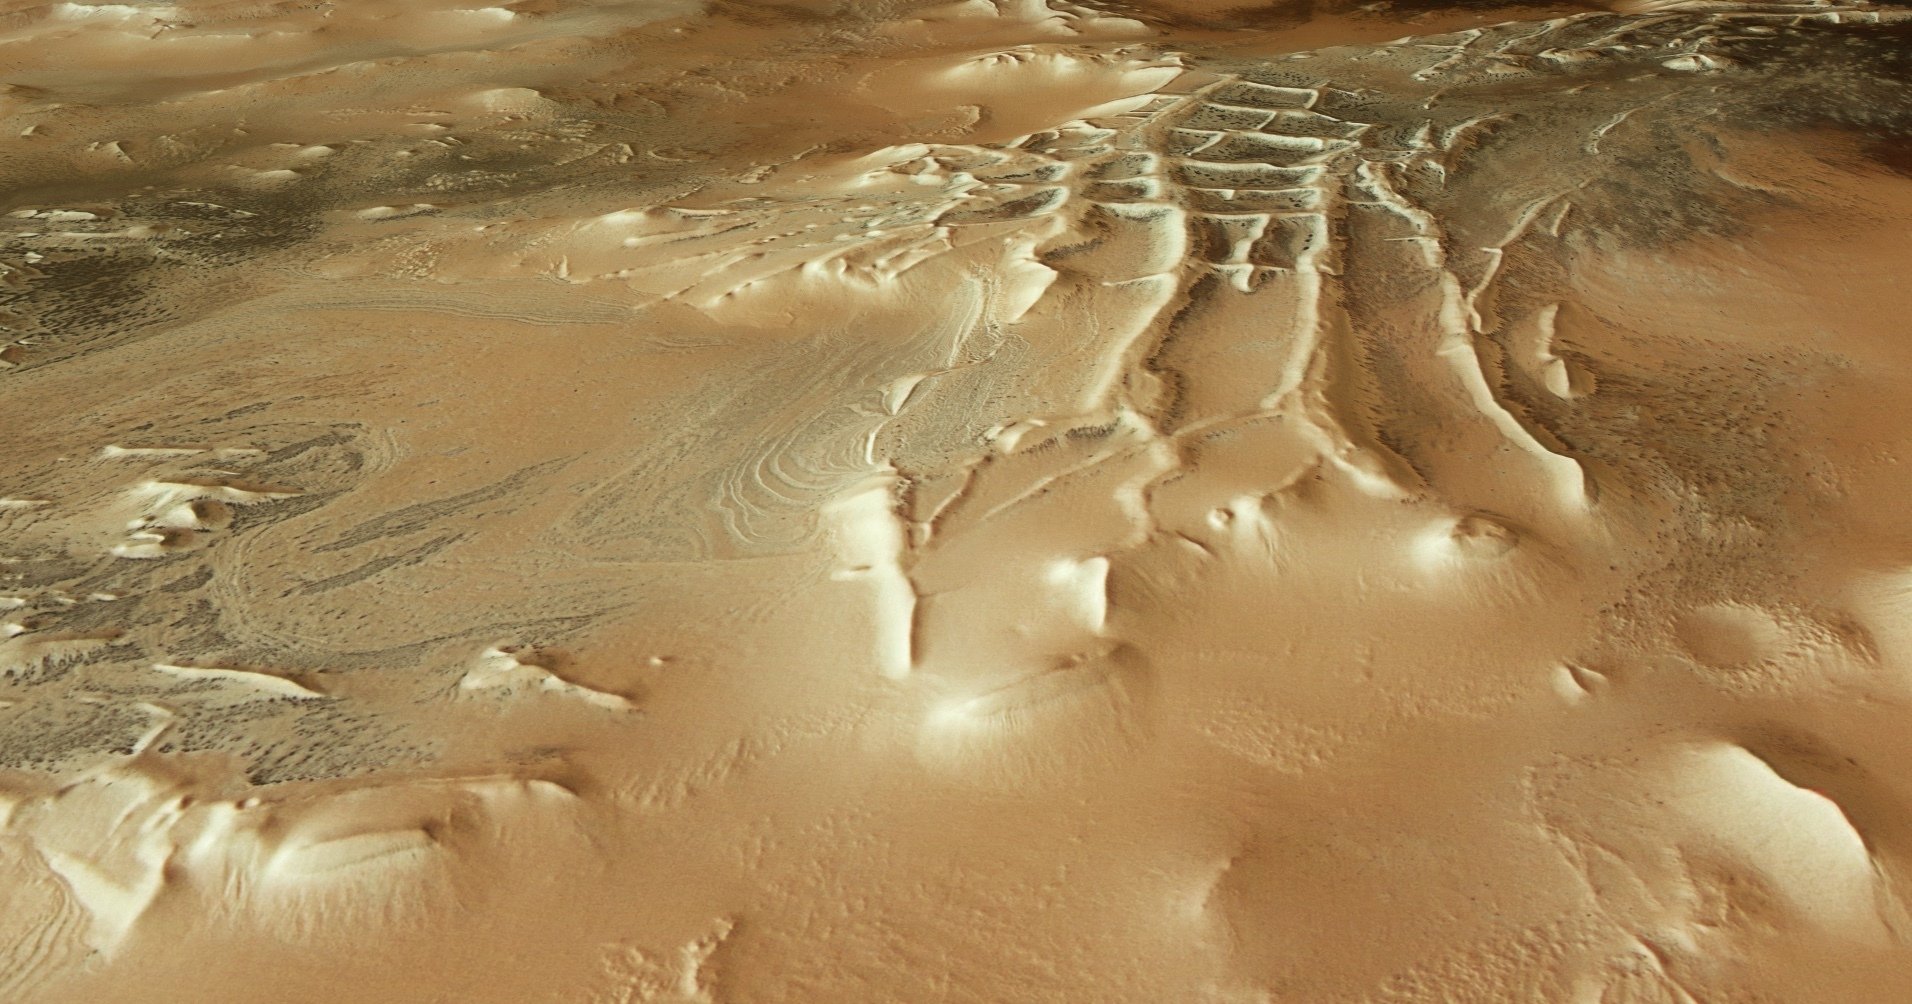 German space agency camera photographing Mars' formation